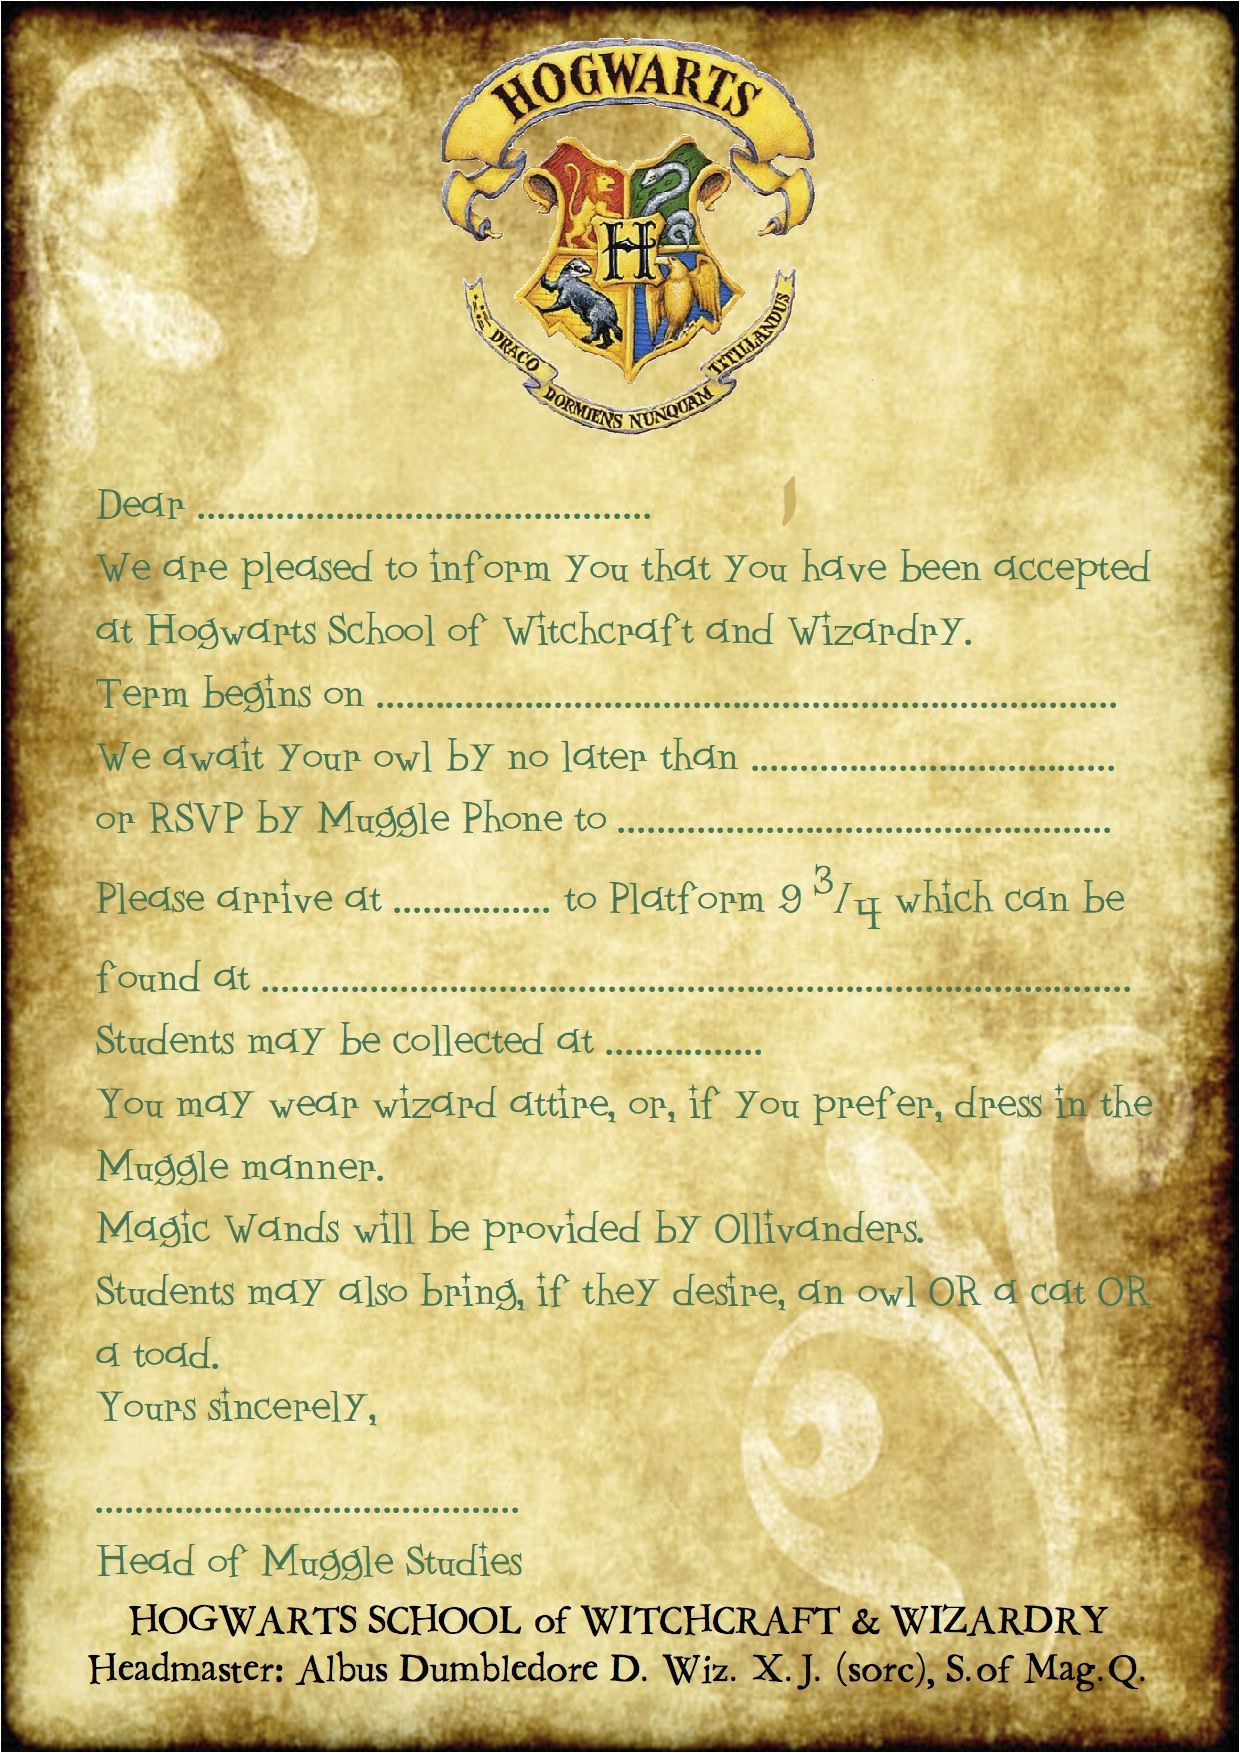 Harry Potter Party Invitation Template Pin by Rylee Bannon On Harry Potter In 2019 Harry Potter